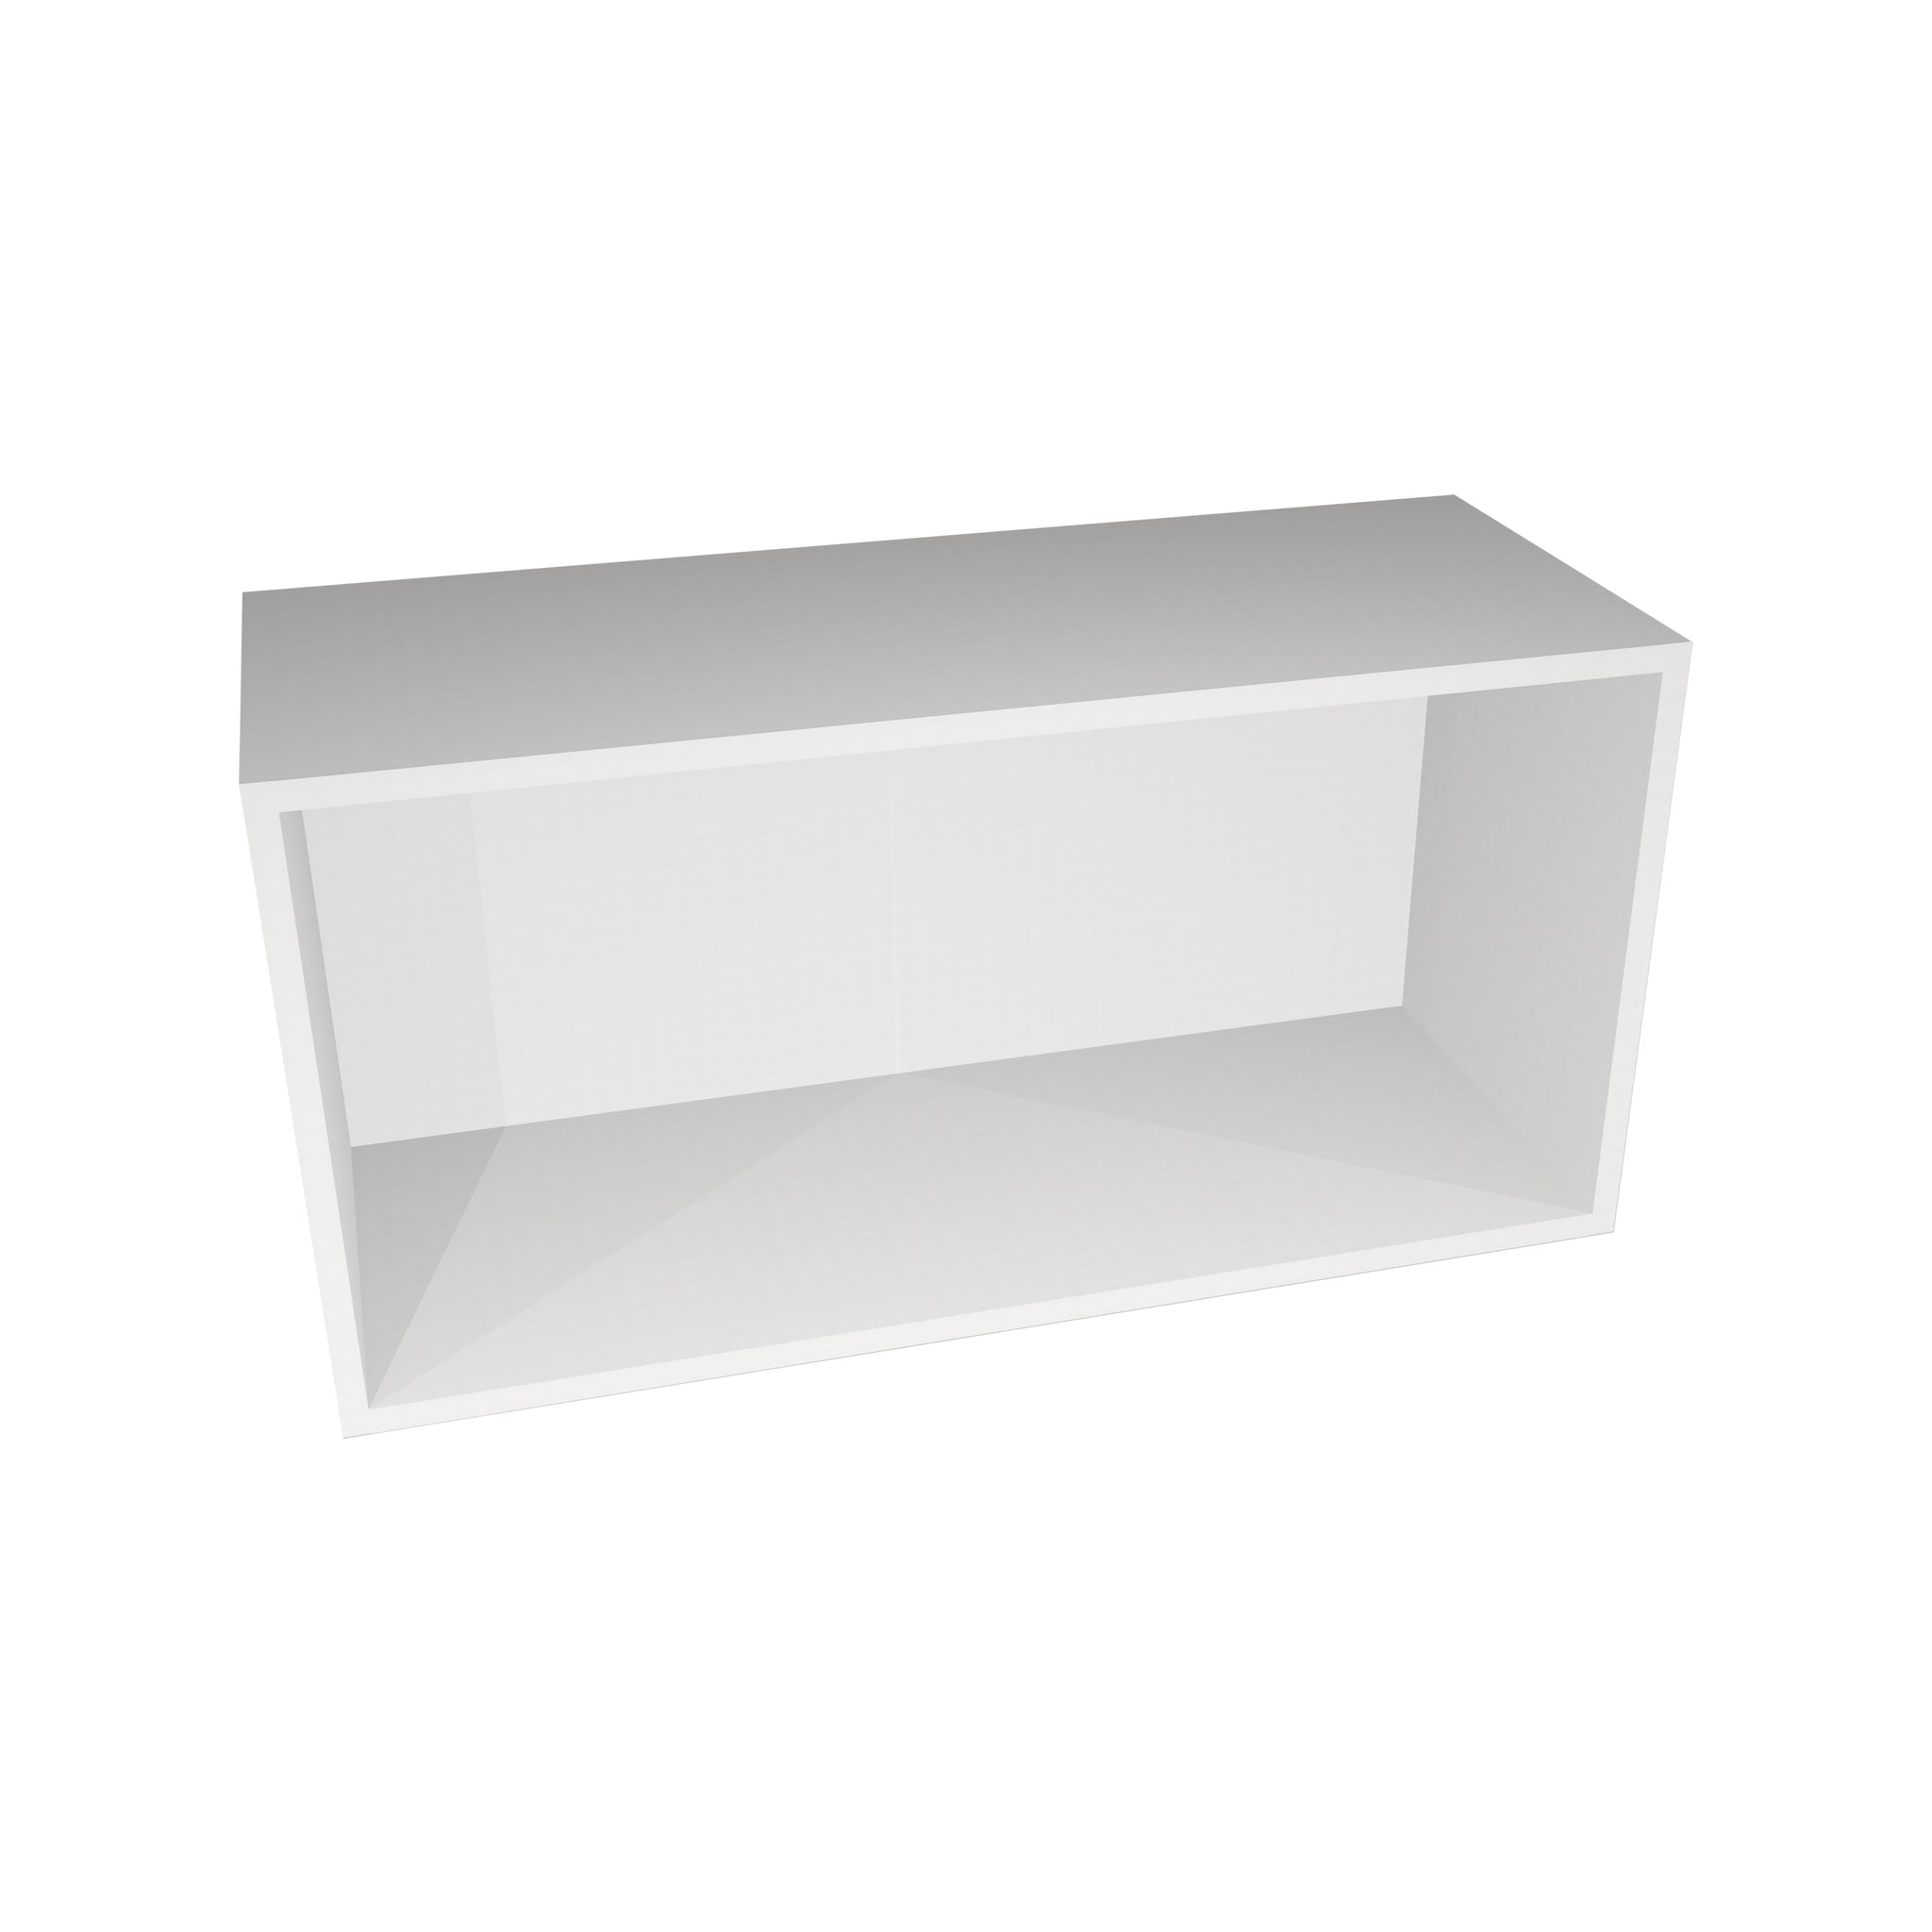 RTA - Lacquer White - Wall Open Cabinet | 30"W x 15"H x 12"D